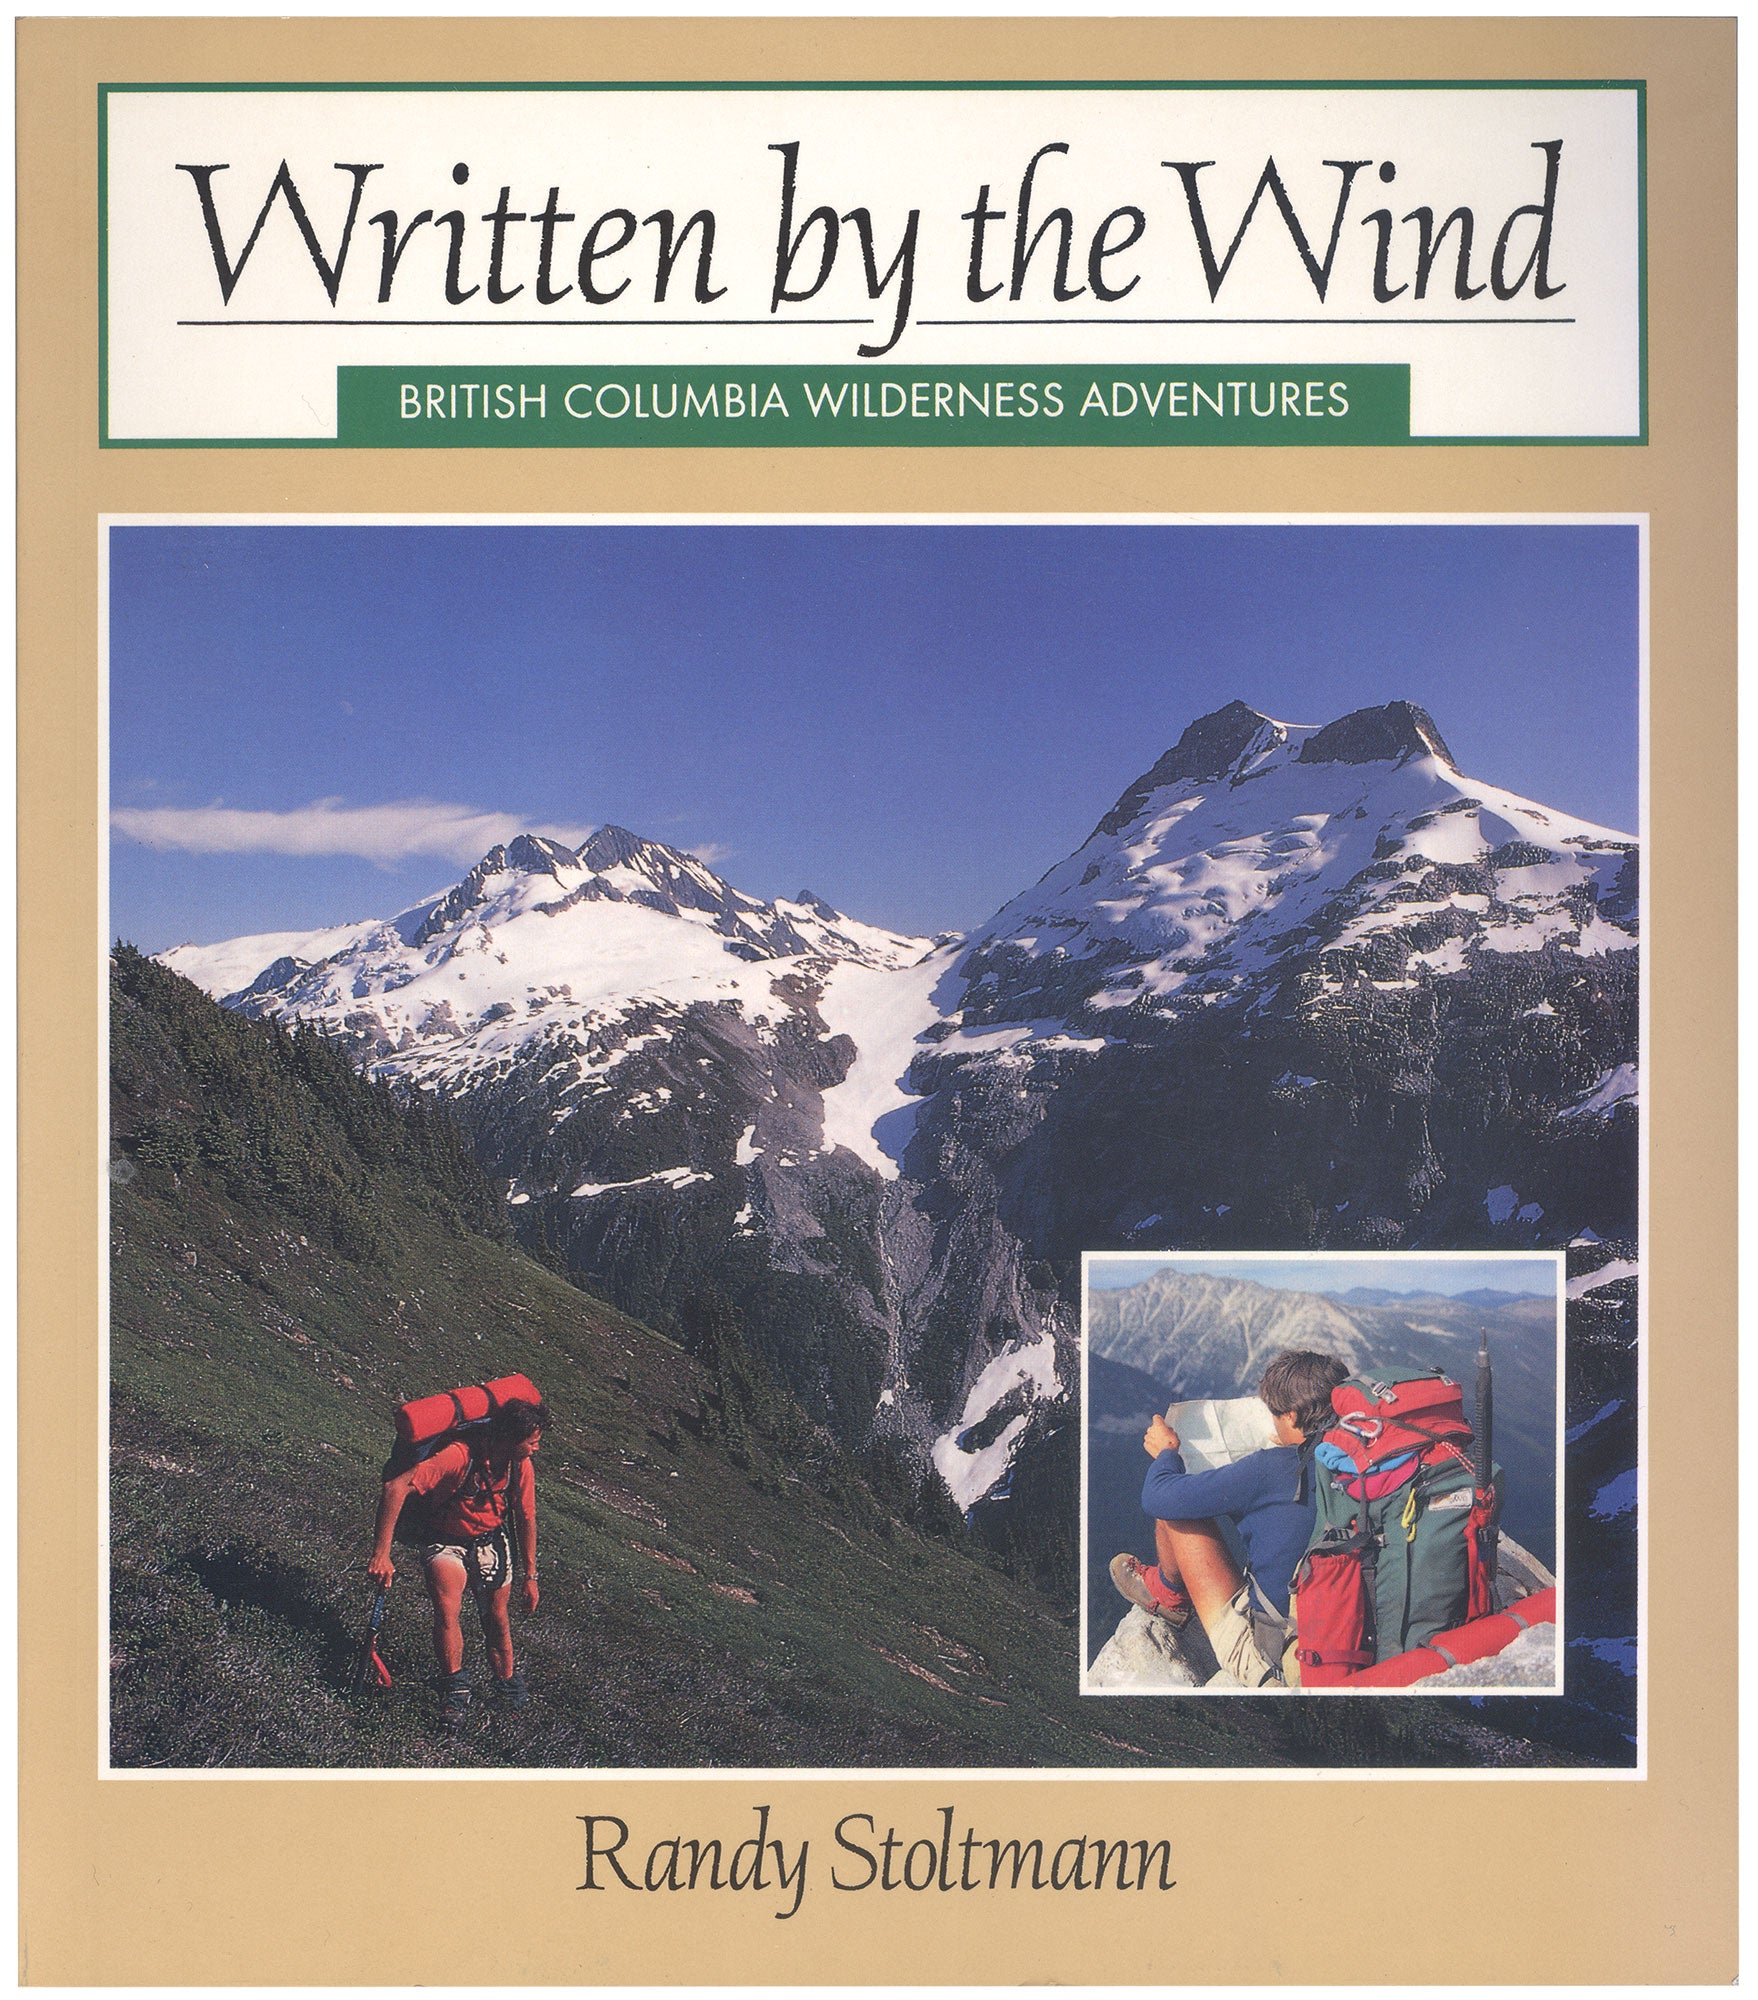 Photos of a person hiking on the mountain, and another person reading a map at the peak of a mountain. Text on the image says "Written by the Wind. British Columbia Wilderness Adventures. Randy Stoltmann." End of image description.